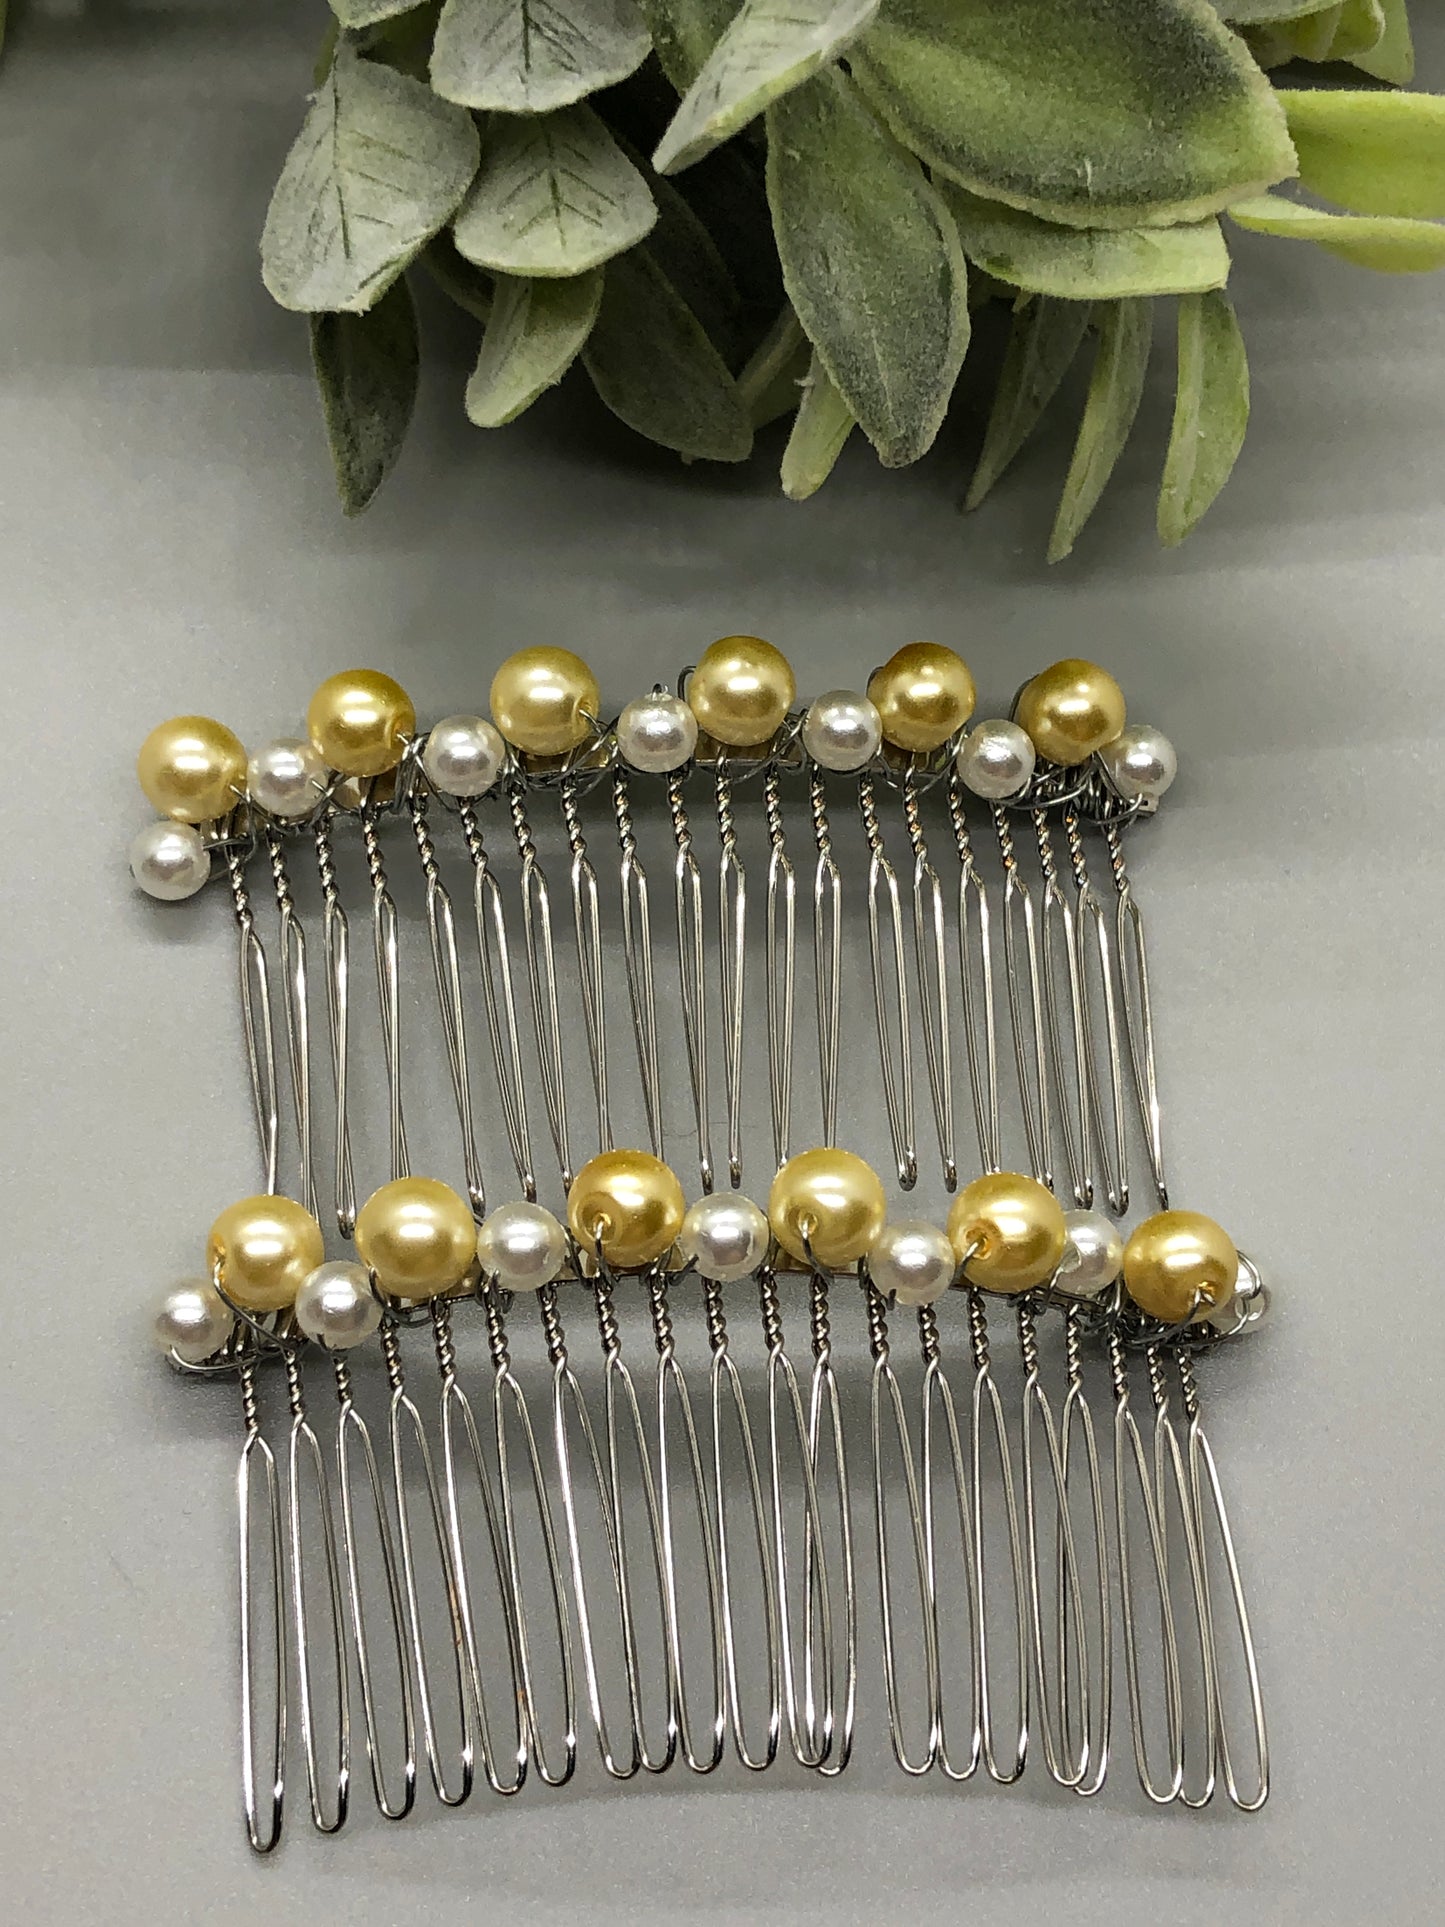 Pale Yellow White Hair Comb 3.5' Silver Comb 2pc set Retro Bridal Prom Wedding Party